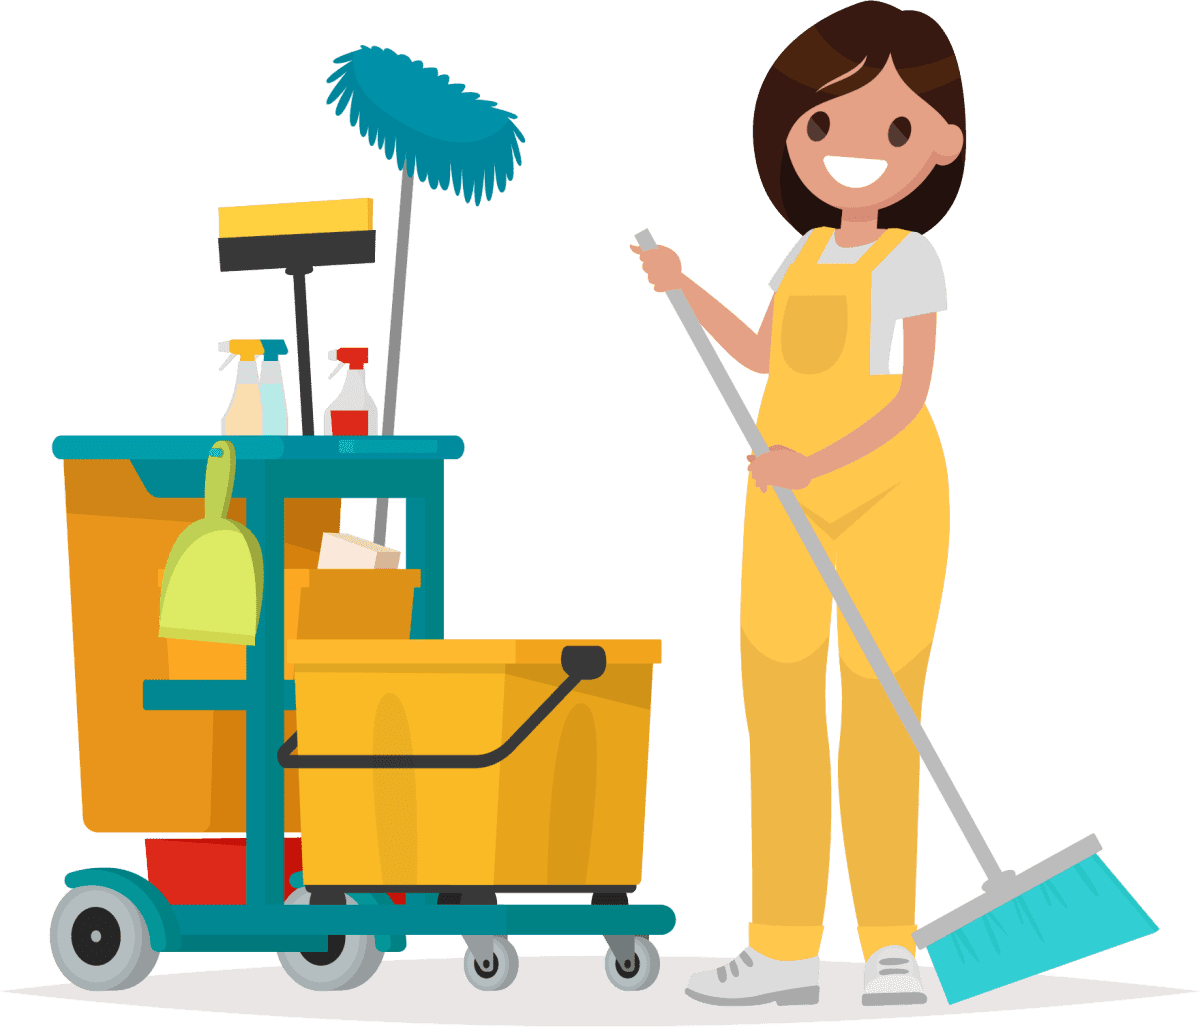 workplace housekeeping clipart